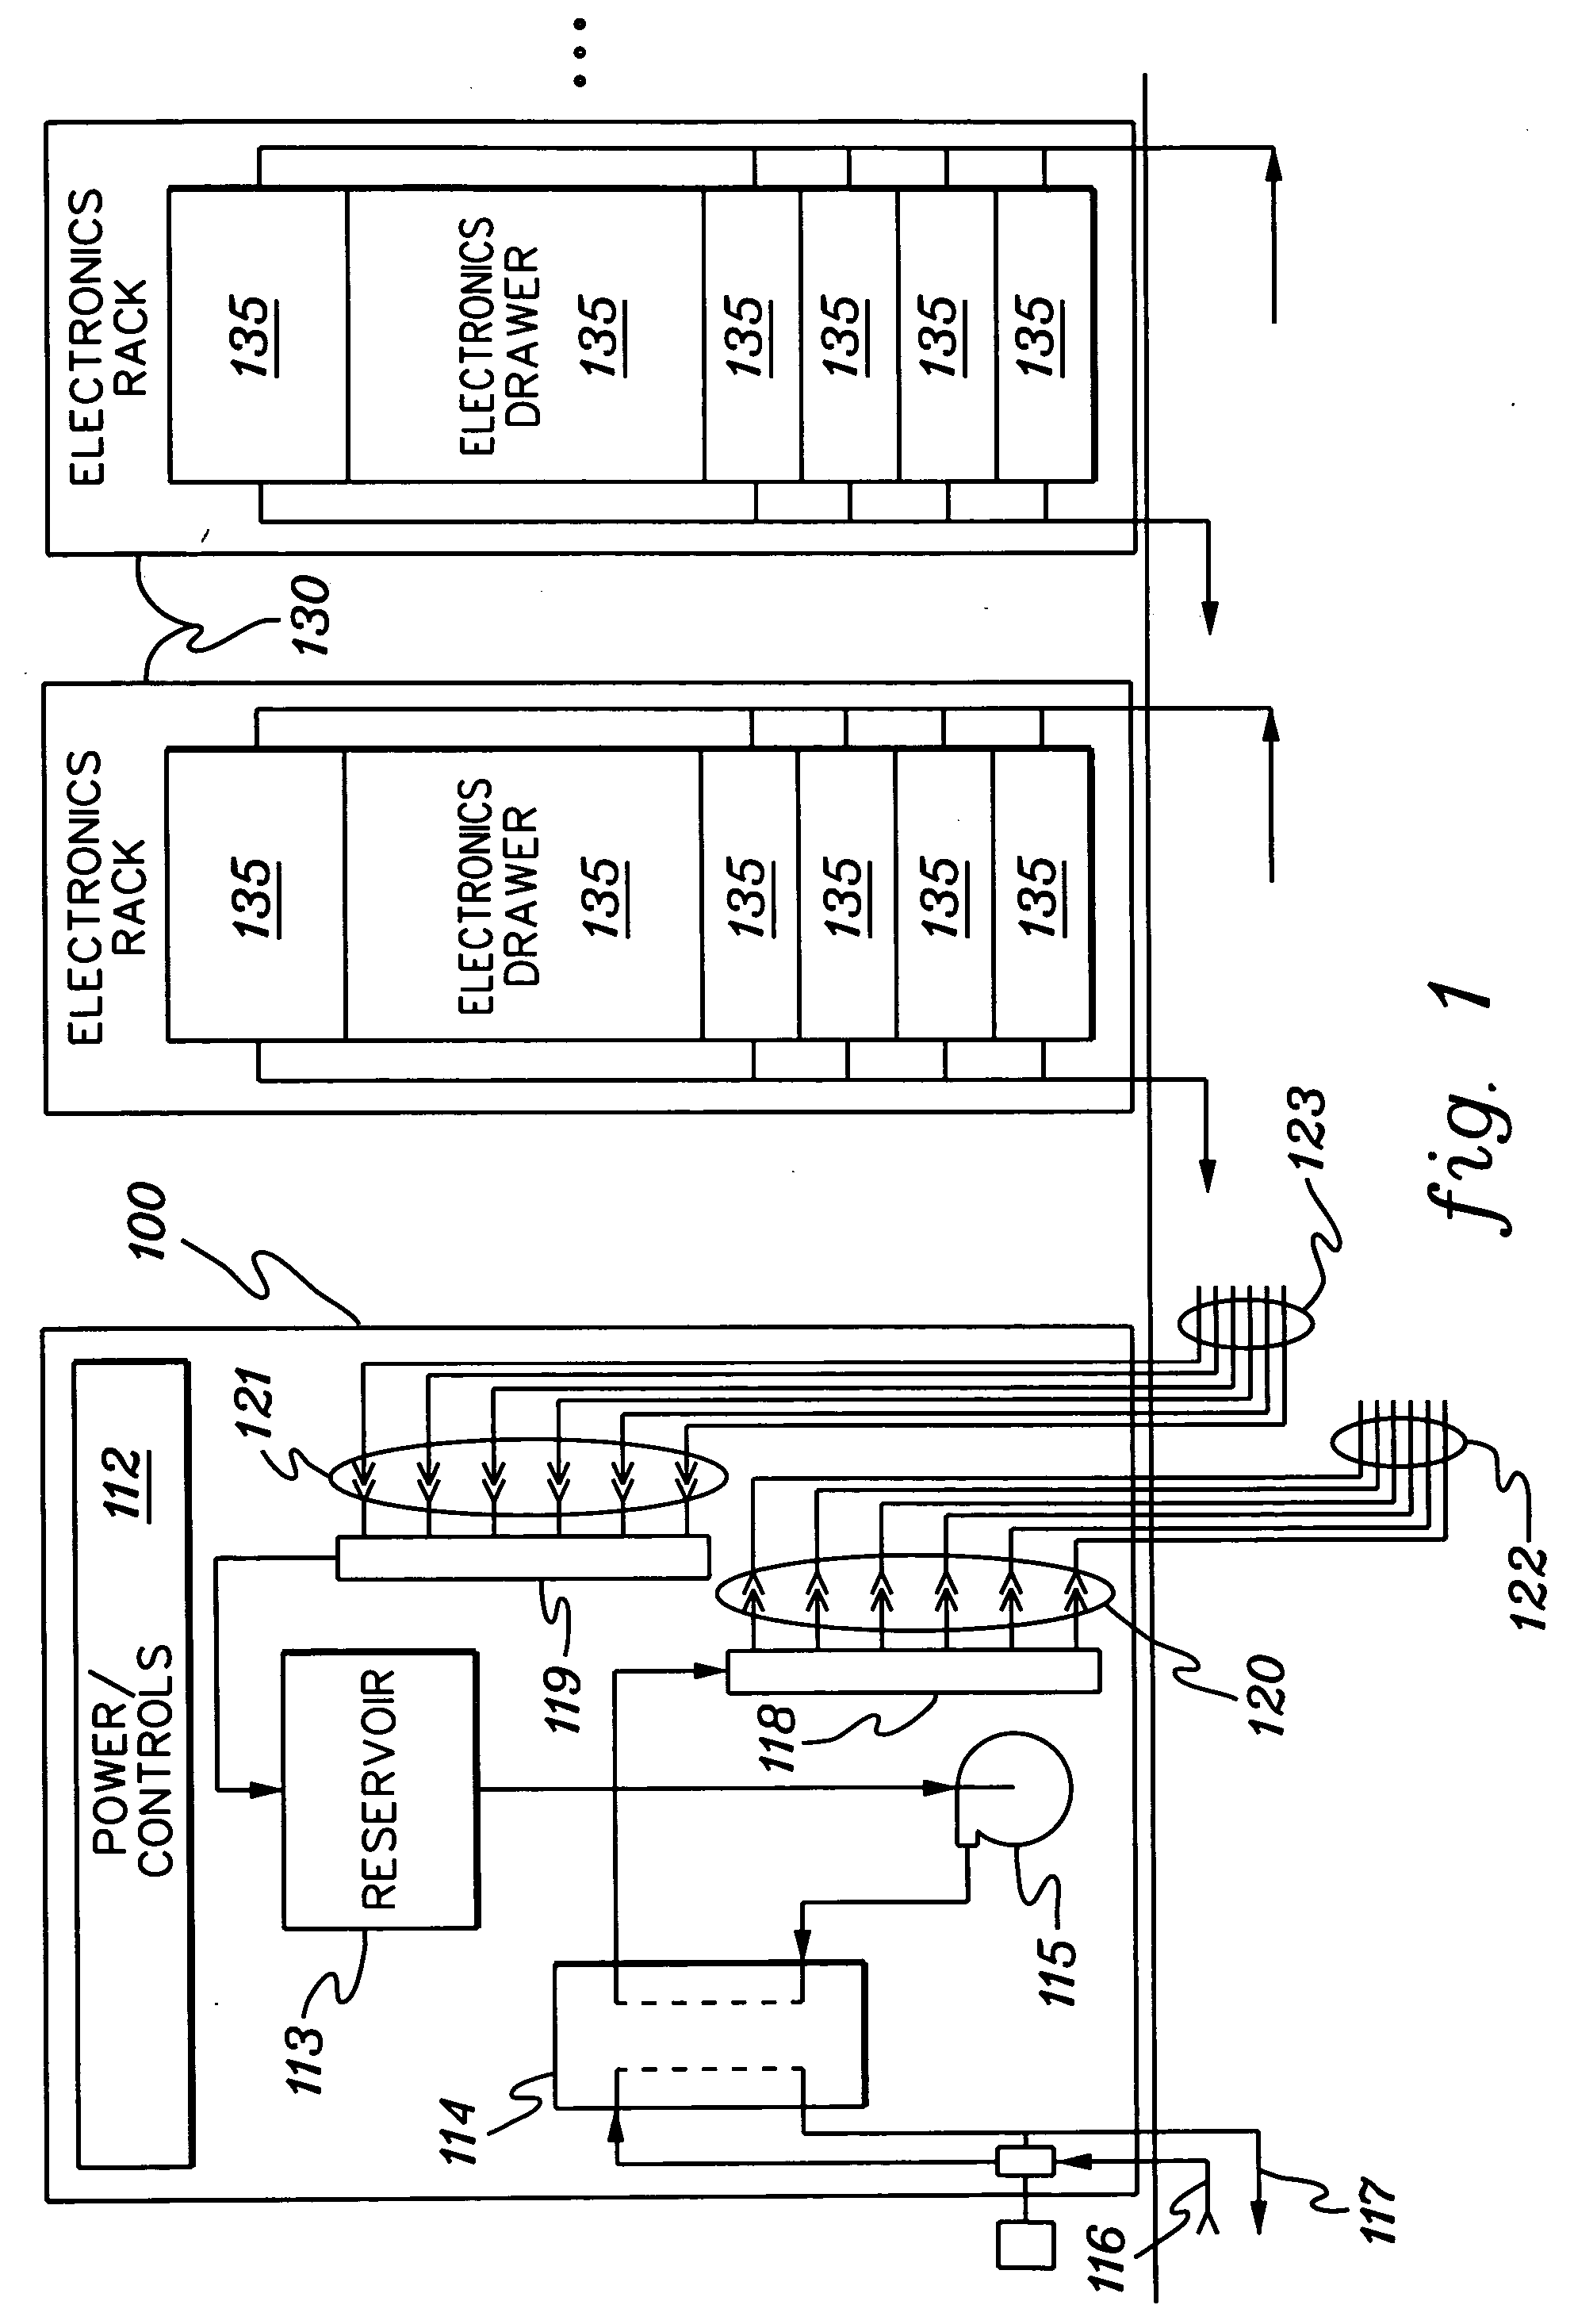 Cooling apparatus and method for an electronics module employing an integrated heat exchange assembly